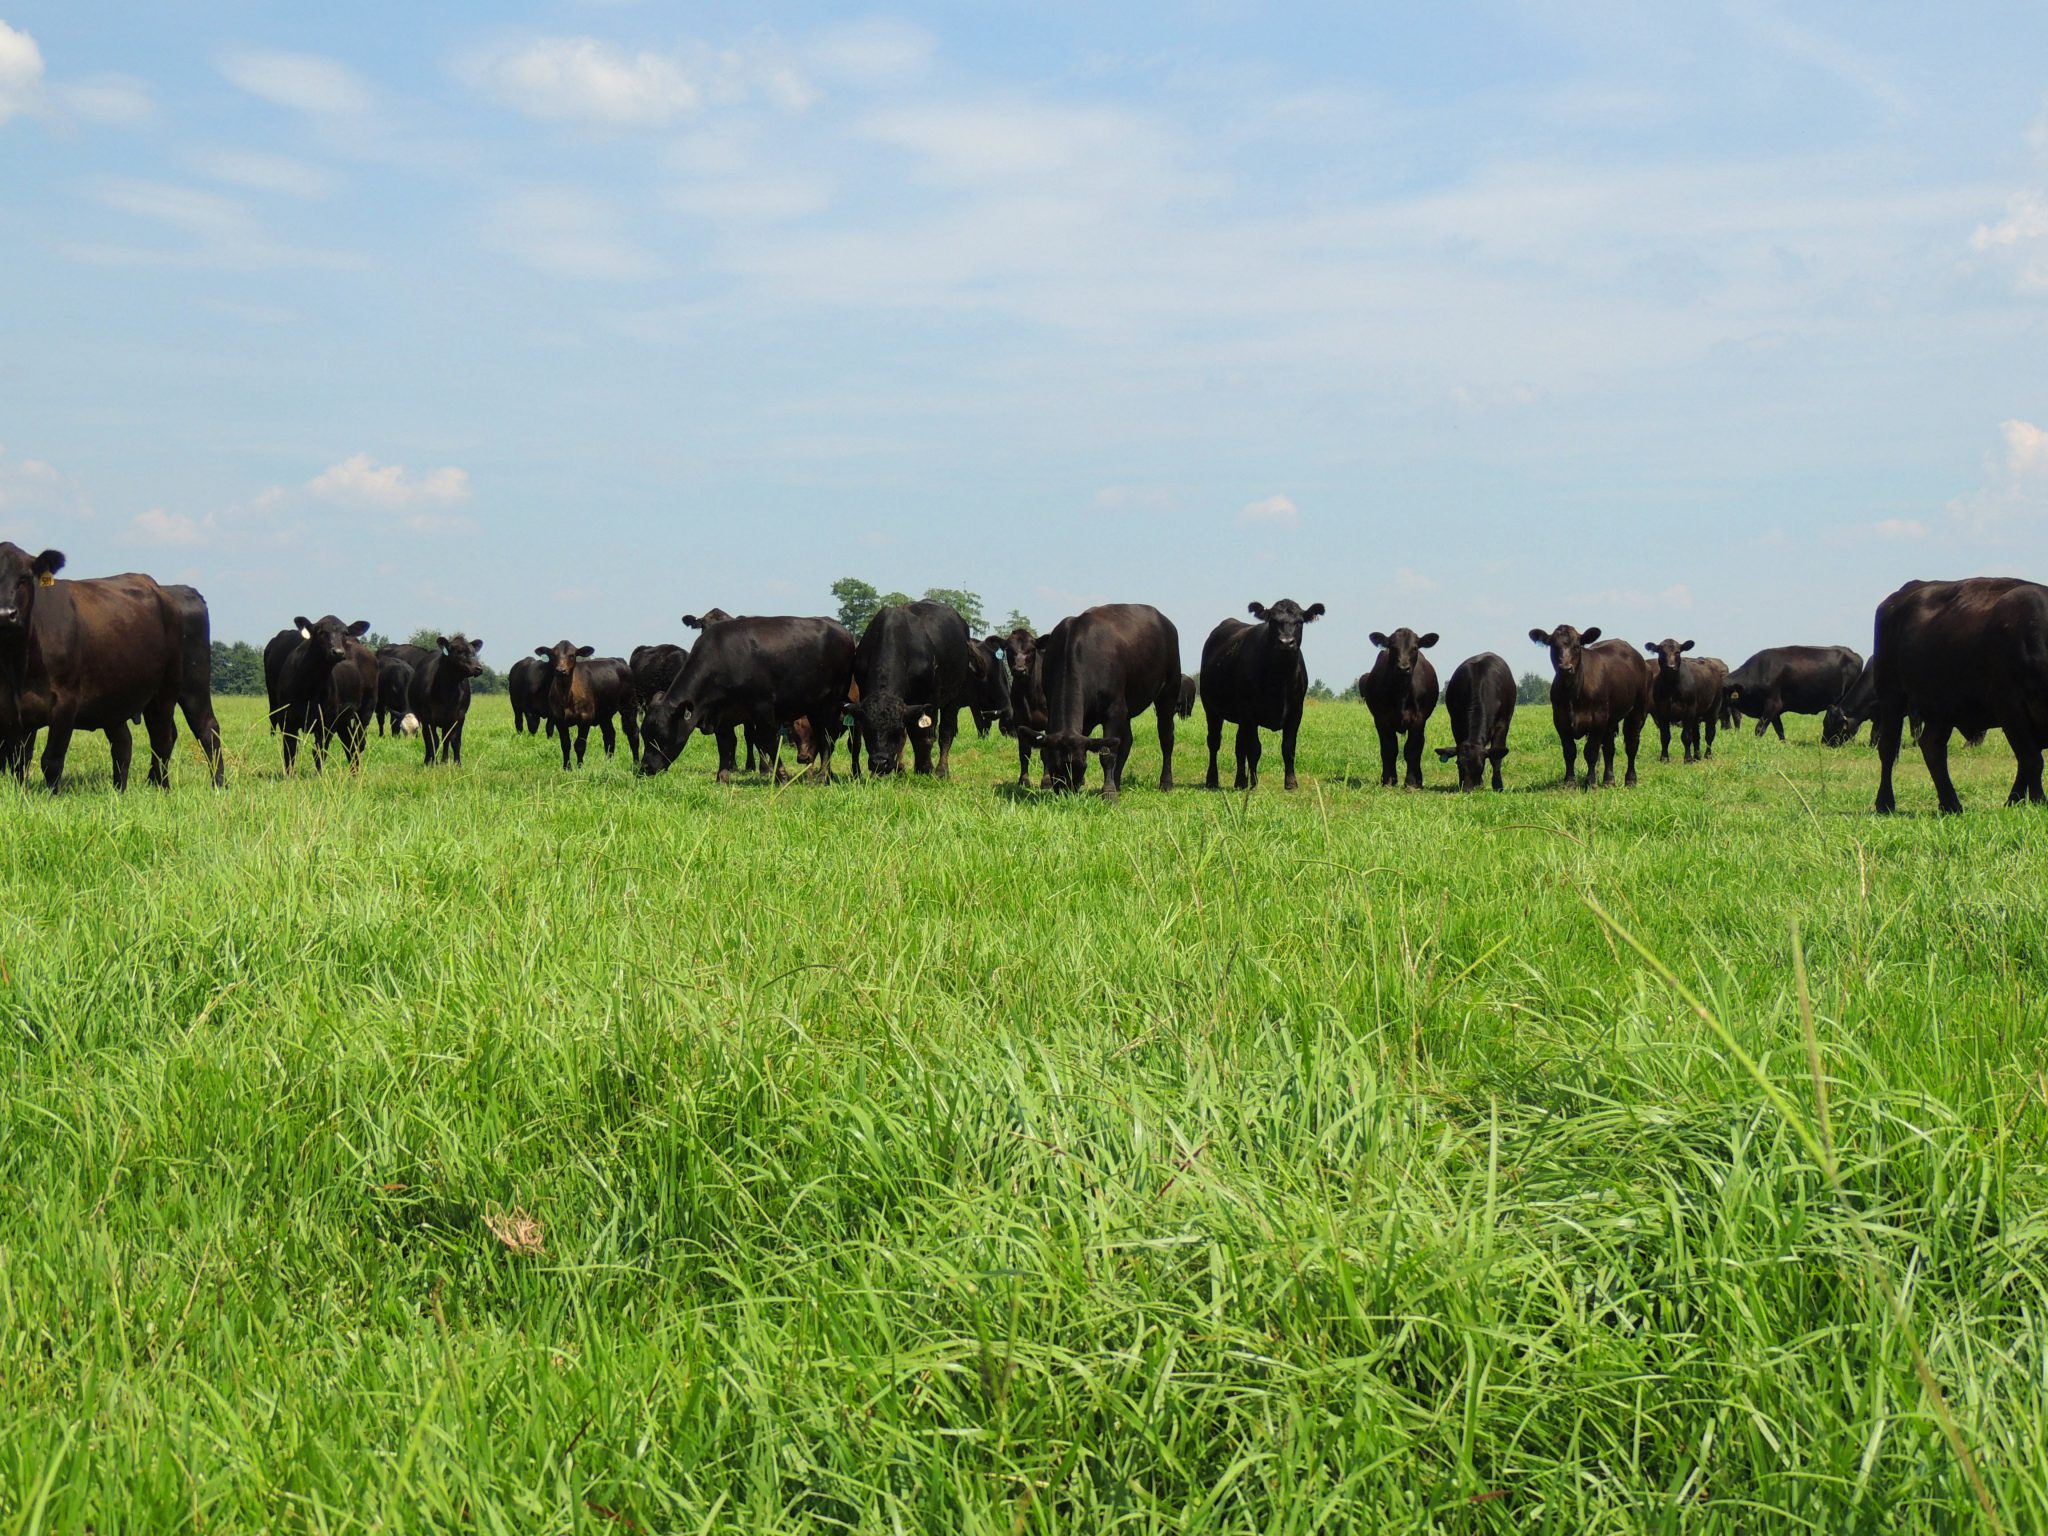 Angus cattle standing in a pasture.